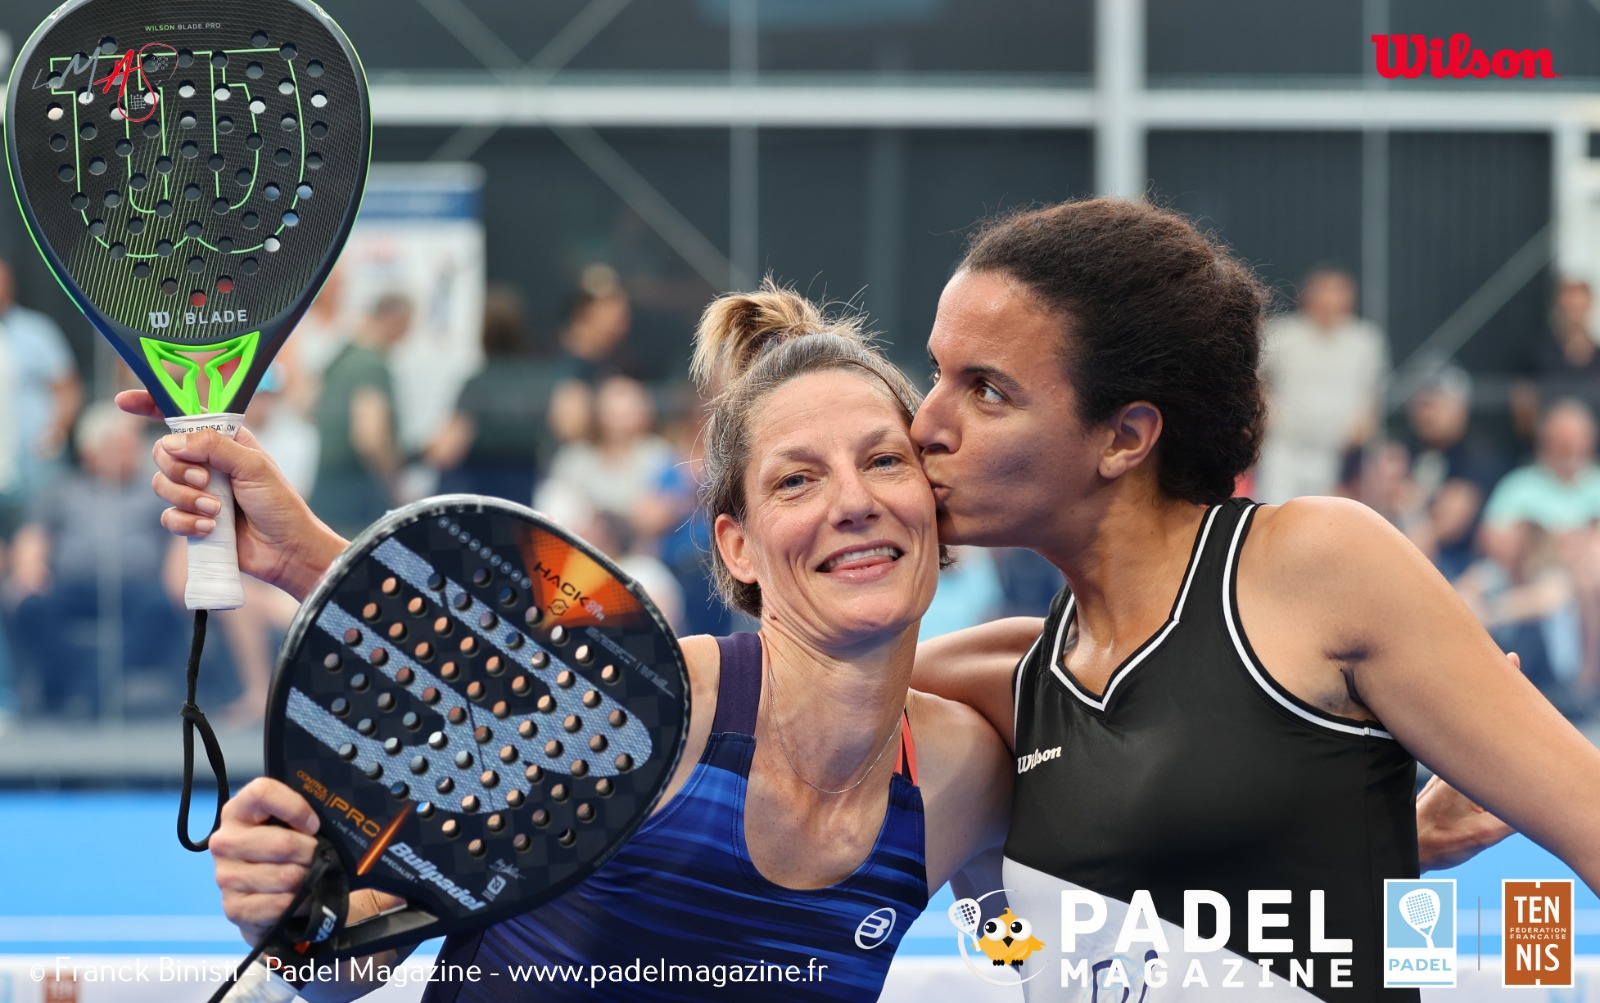 FFT Padel Tour Perpignan: the title for Detriviere/Martin!